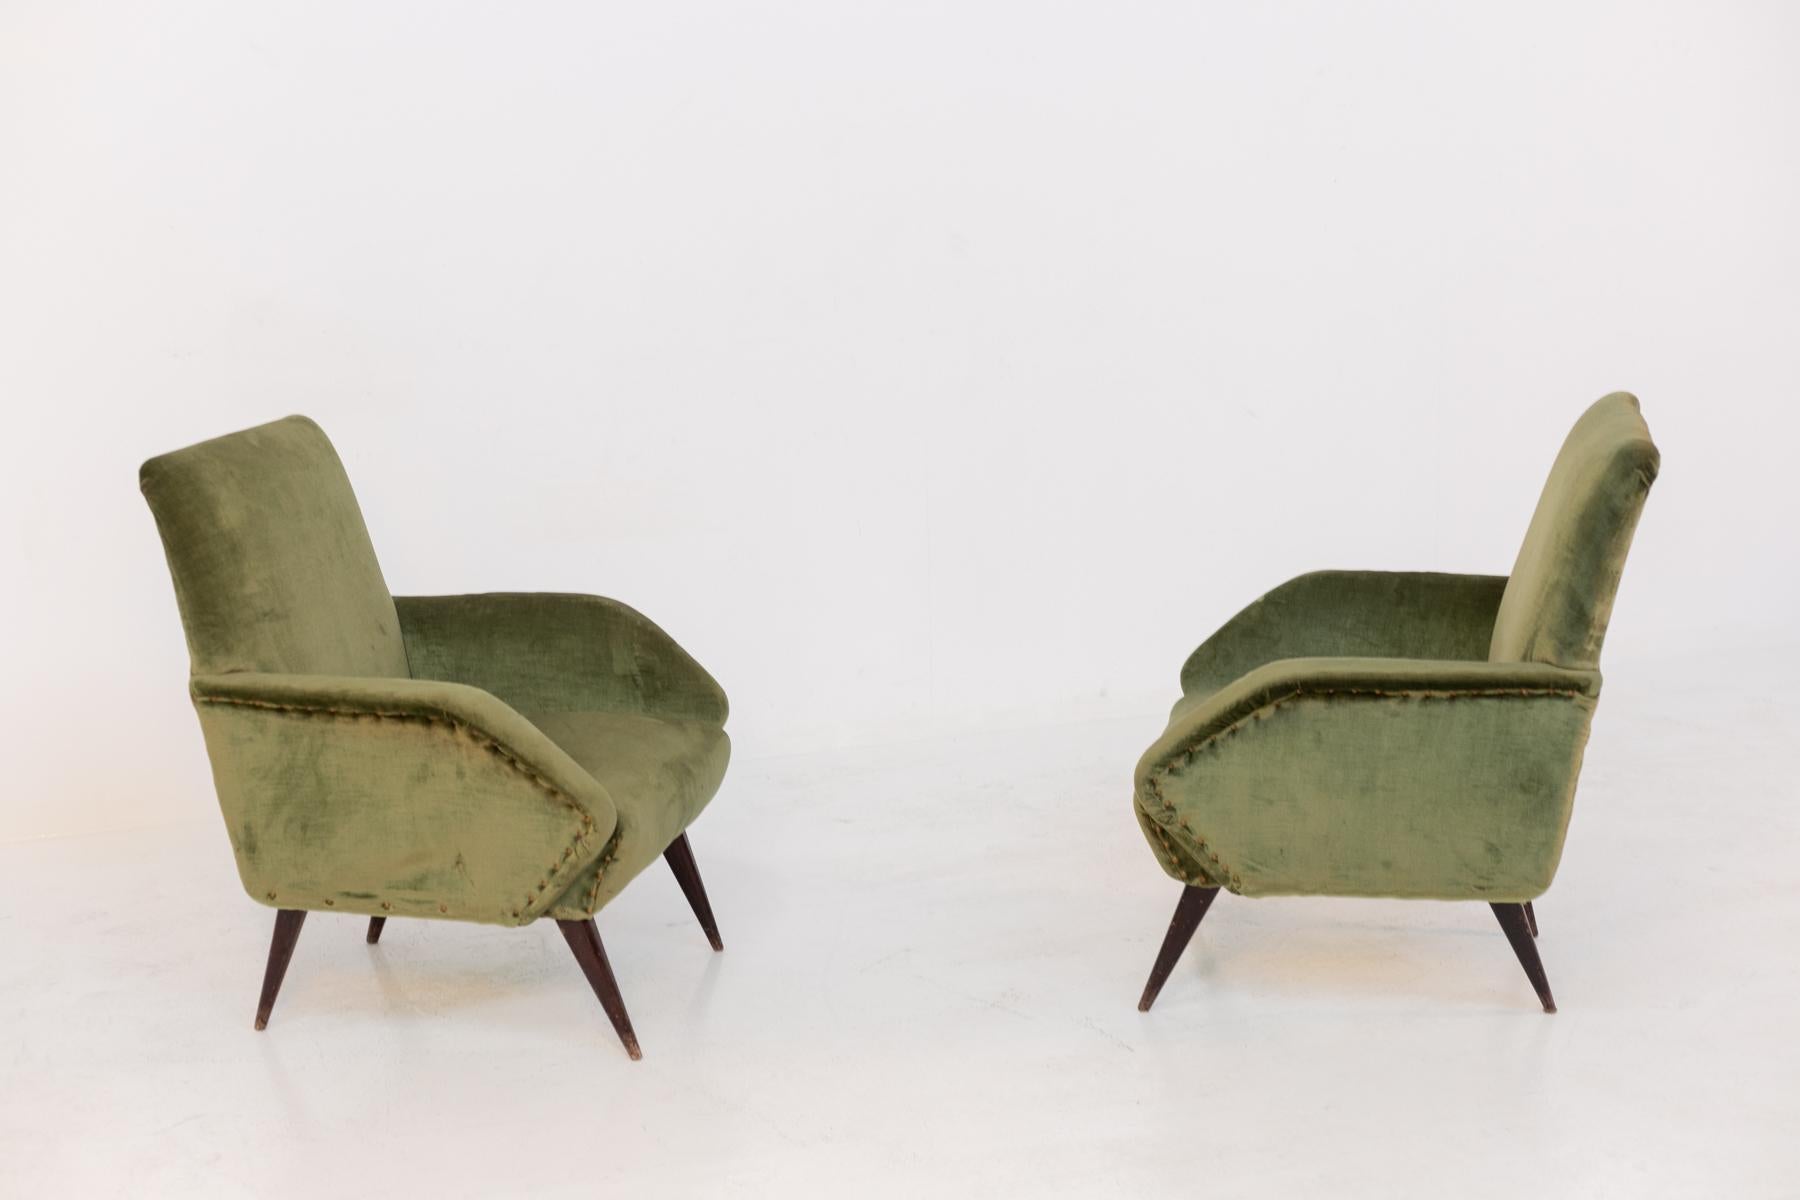 Elegant pair of 1950's Italian armchairs. The armchairs have beautiful geometric shapes that are very sharp and clean. Its armrests are triangular in shape with outward facing tip. To embellish the armchair we find brass studs surrounding the